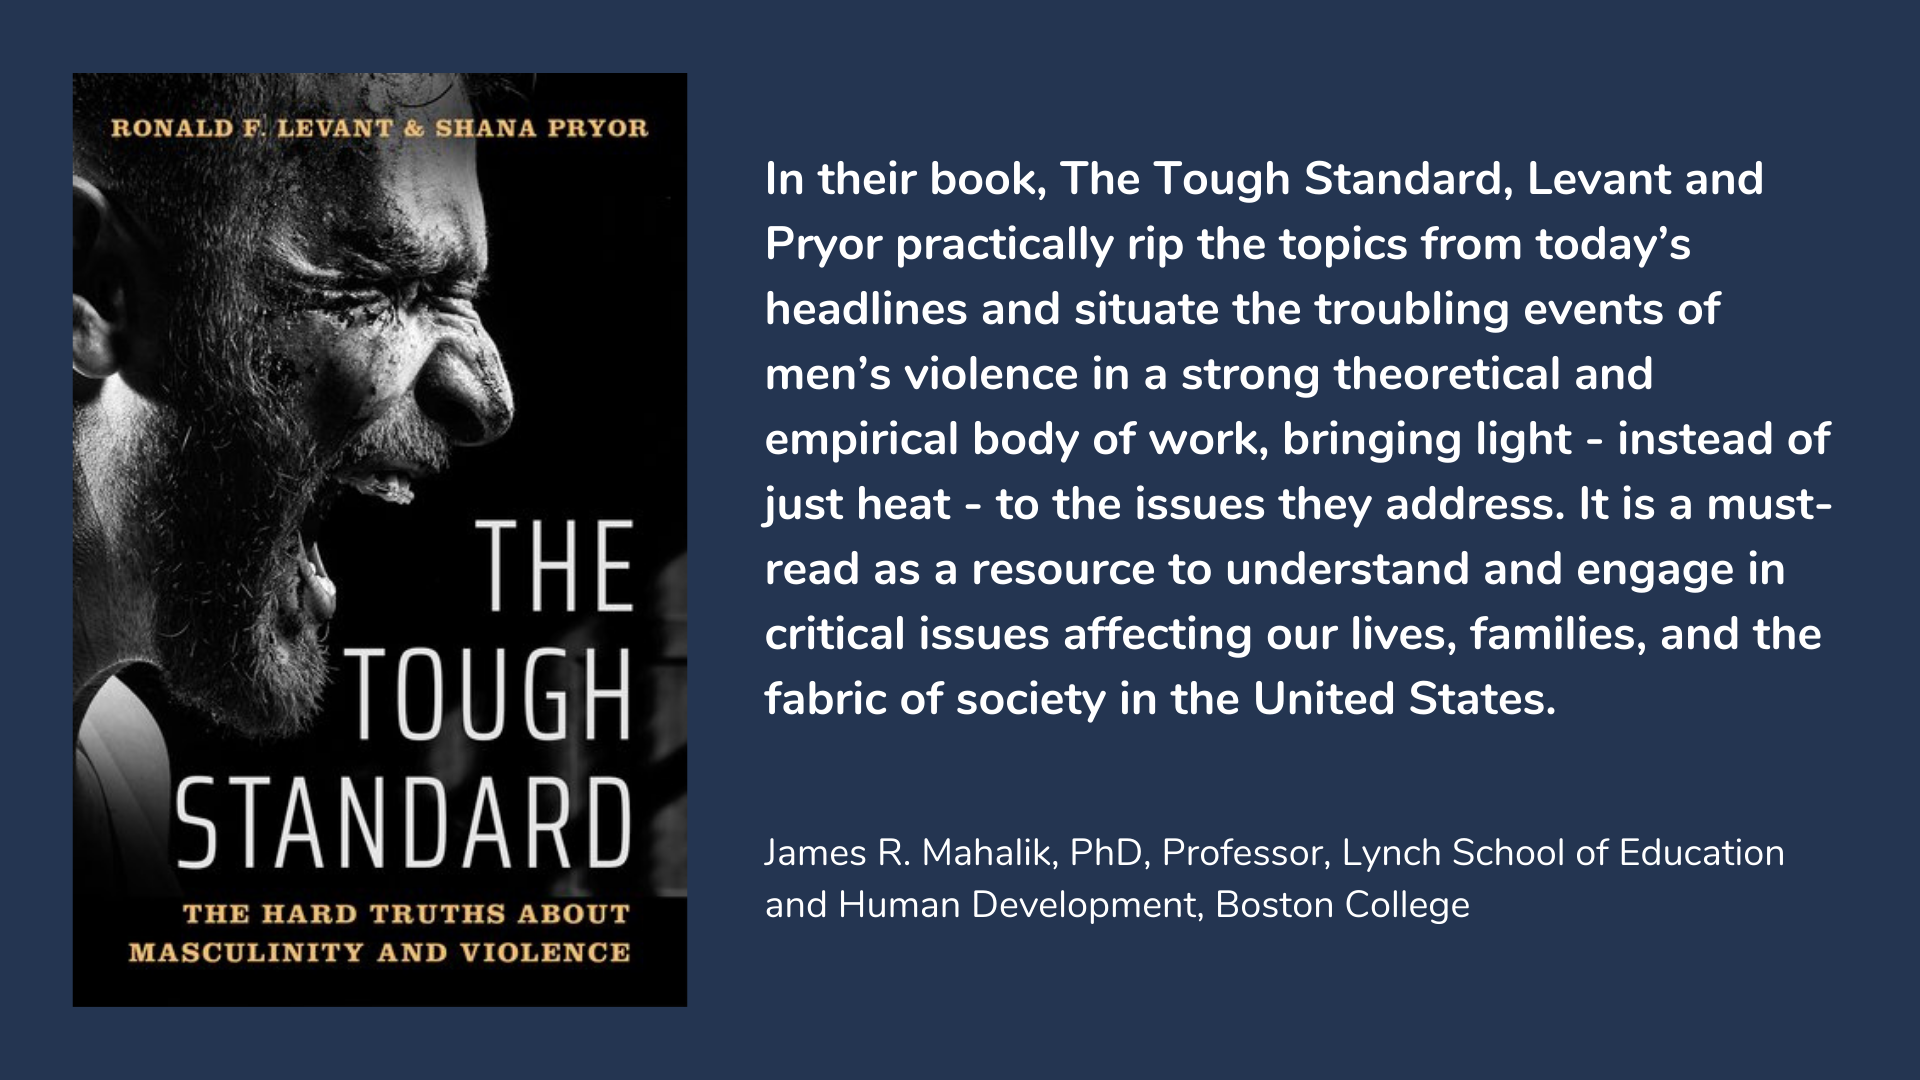 The Tough Standard: The Hard Truths About Masculinity and Violence, book cover and description.